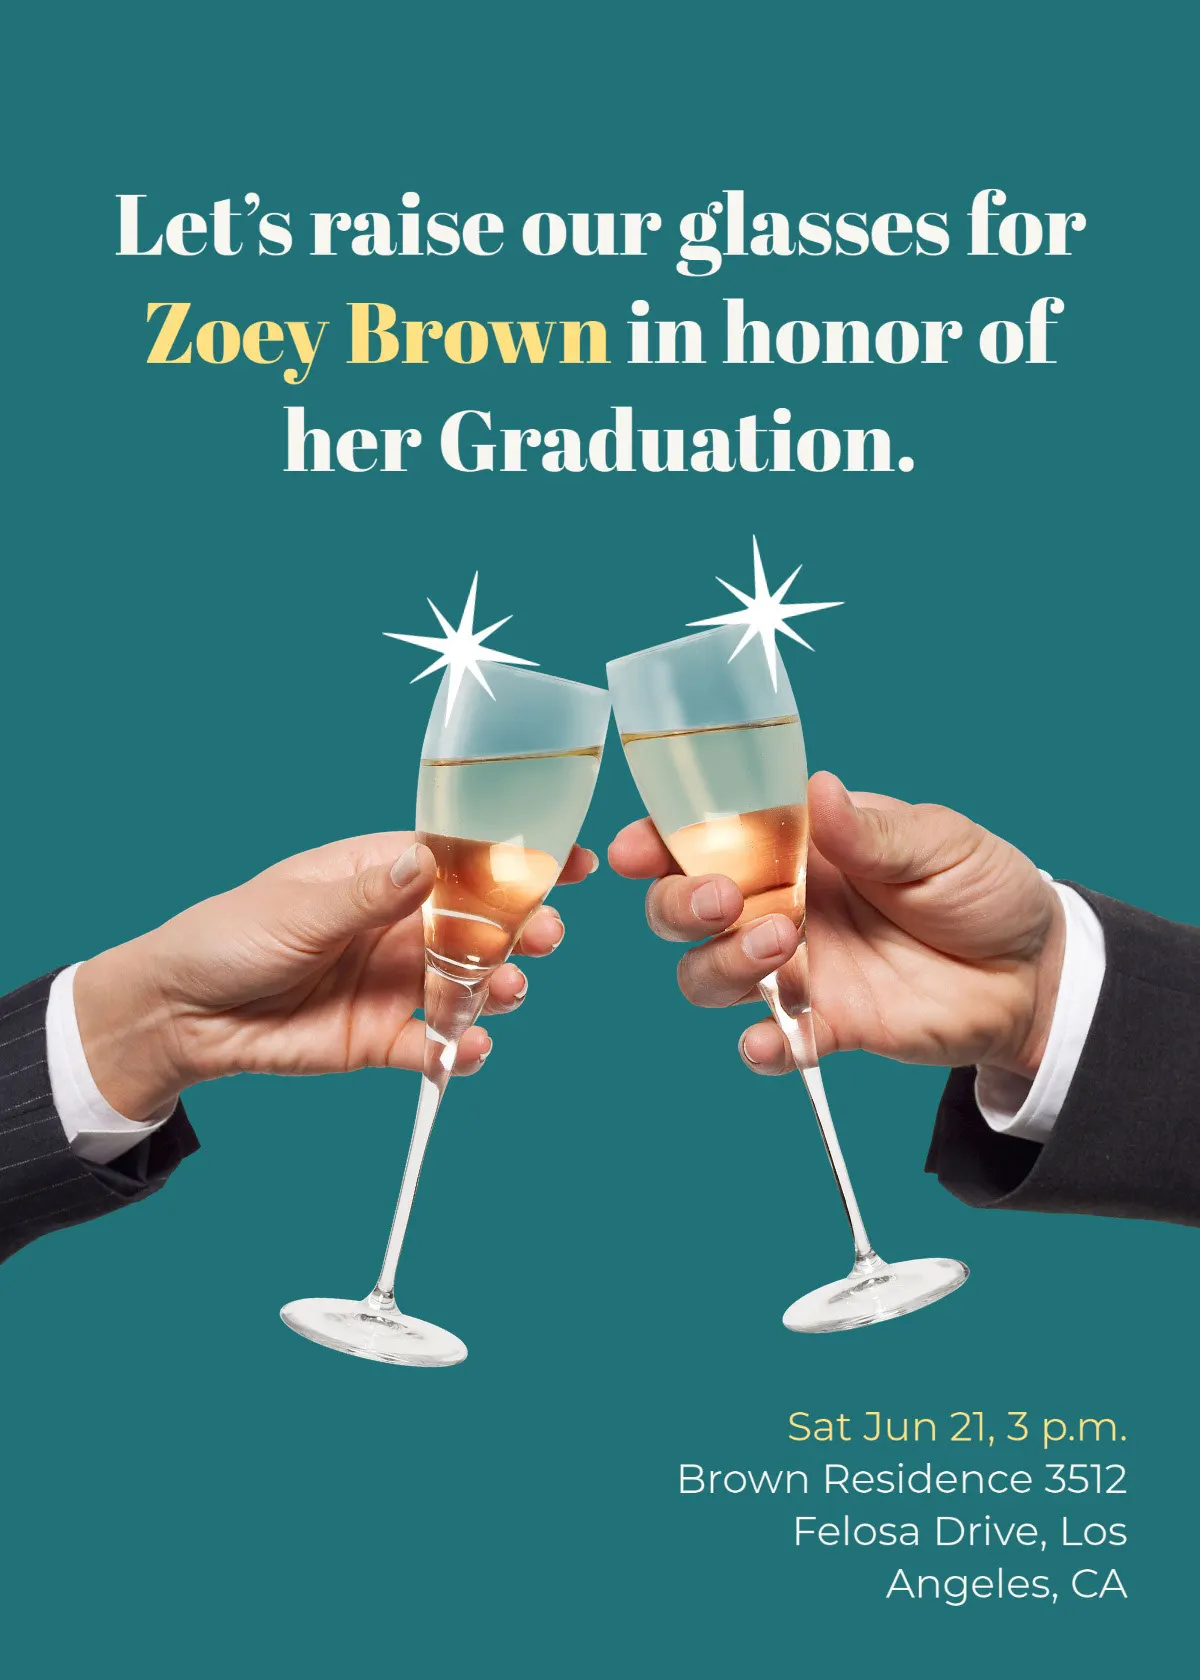 Green Background With Toast Lets Raise Our Glasses For Zoey Brown Graduation Invitation